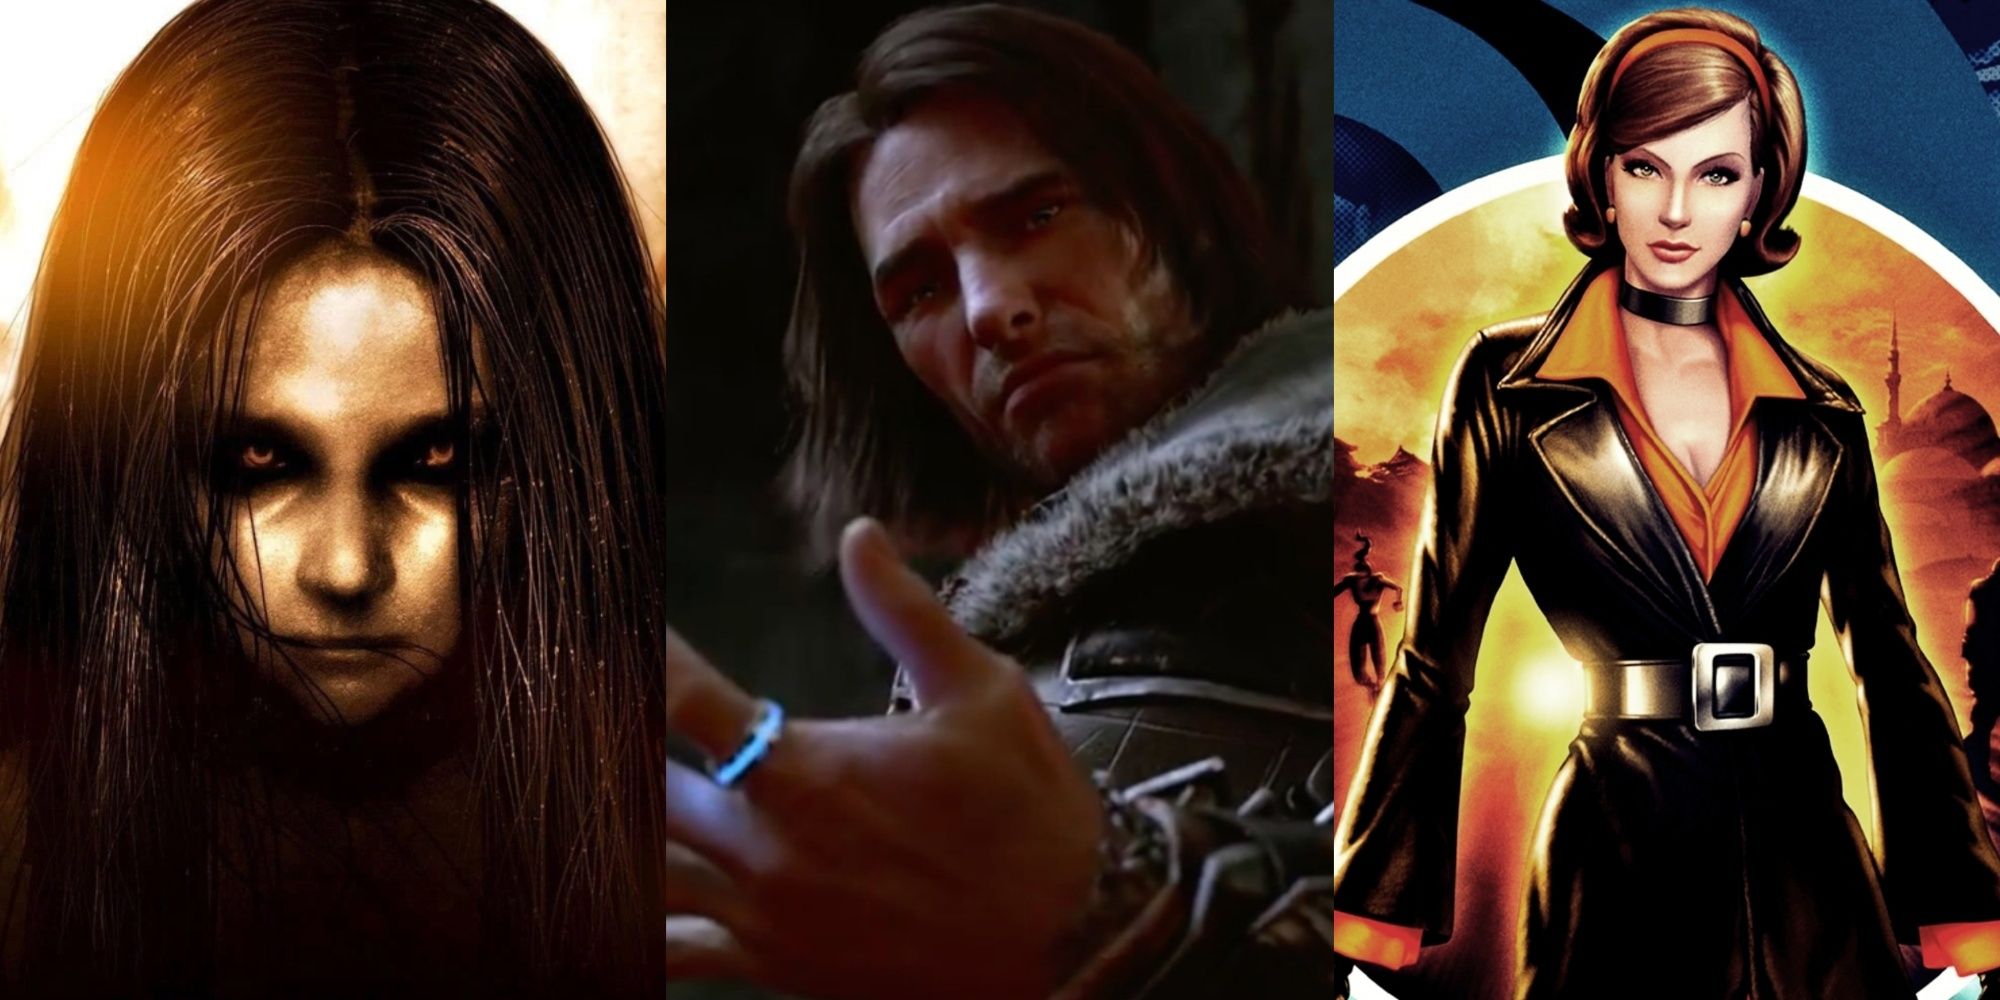 Alma, Talion, and Cate Archer next to one another in a collage